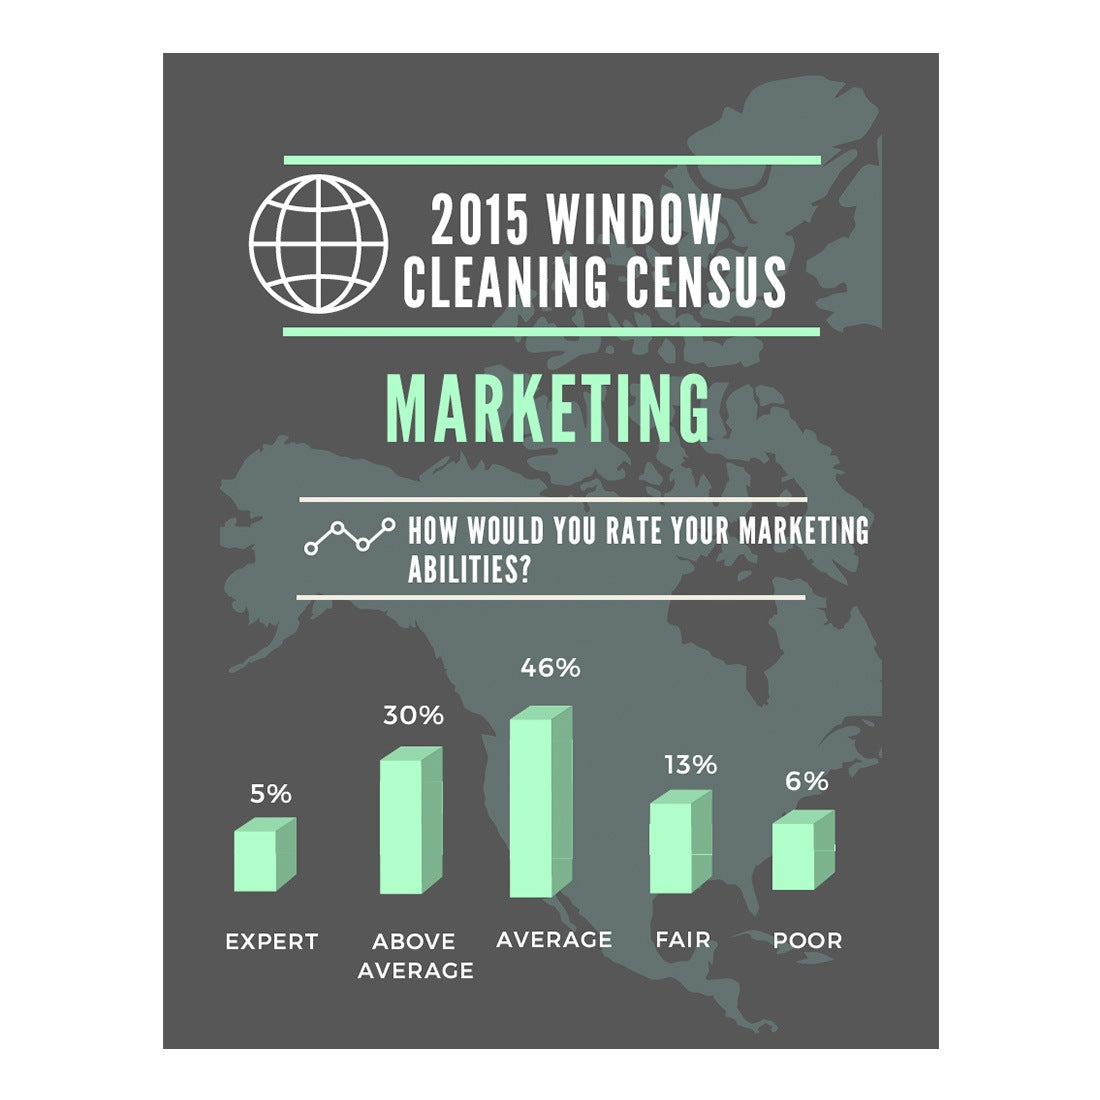 2015 Window Cleaning Census Marketing